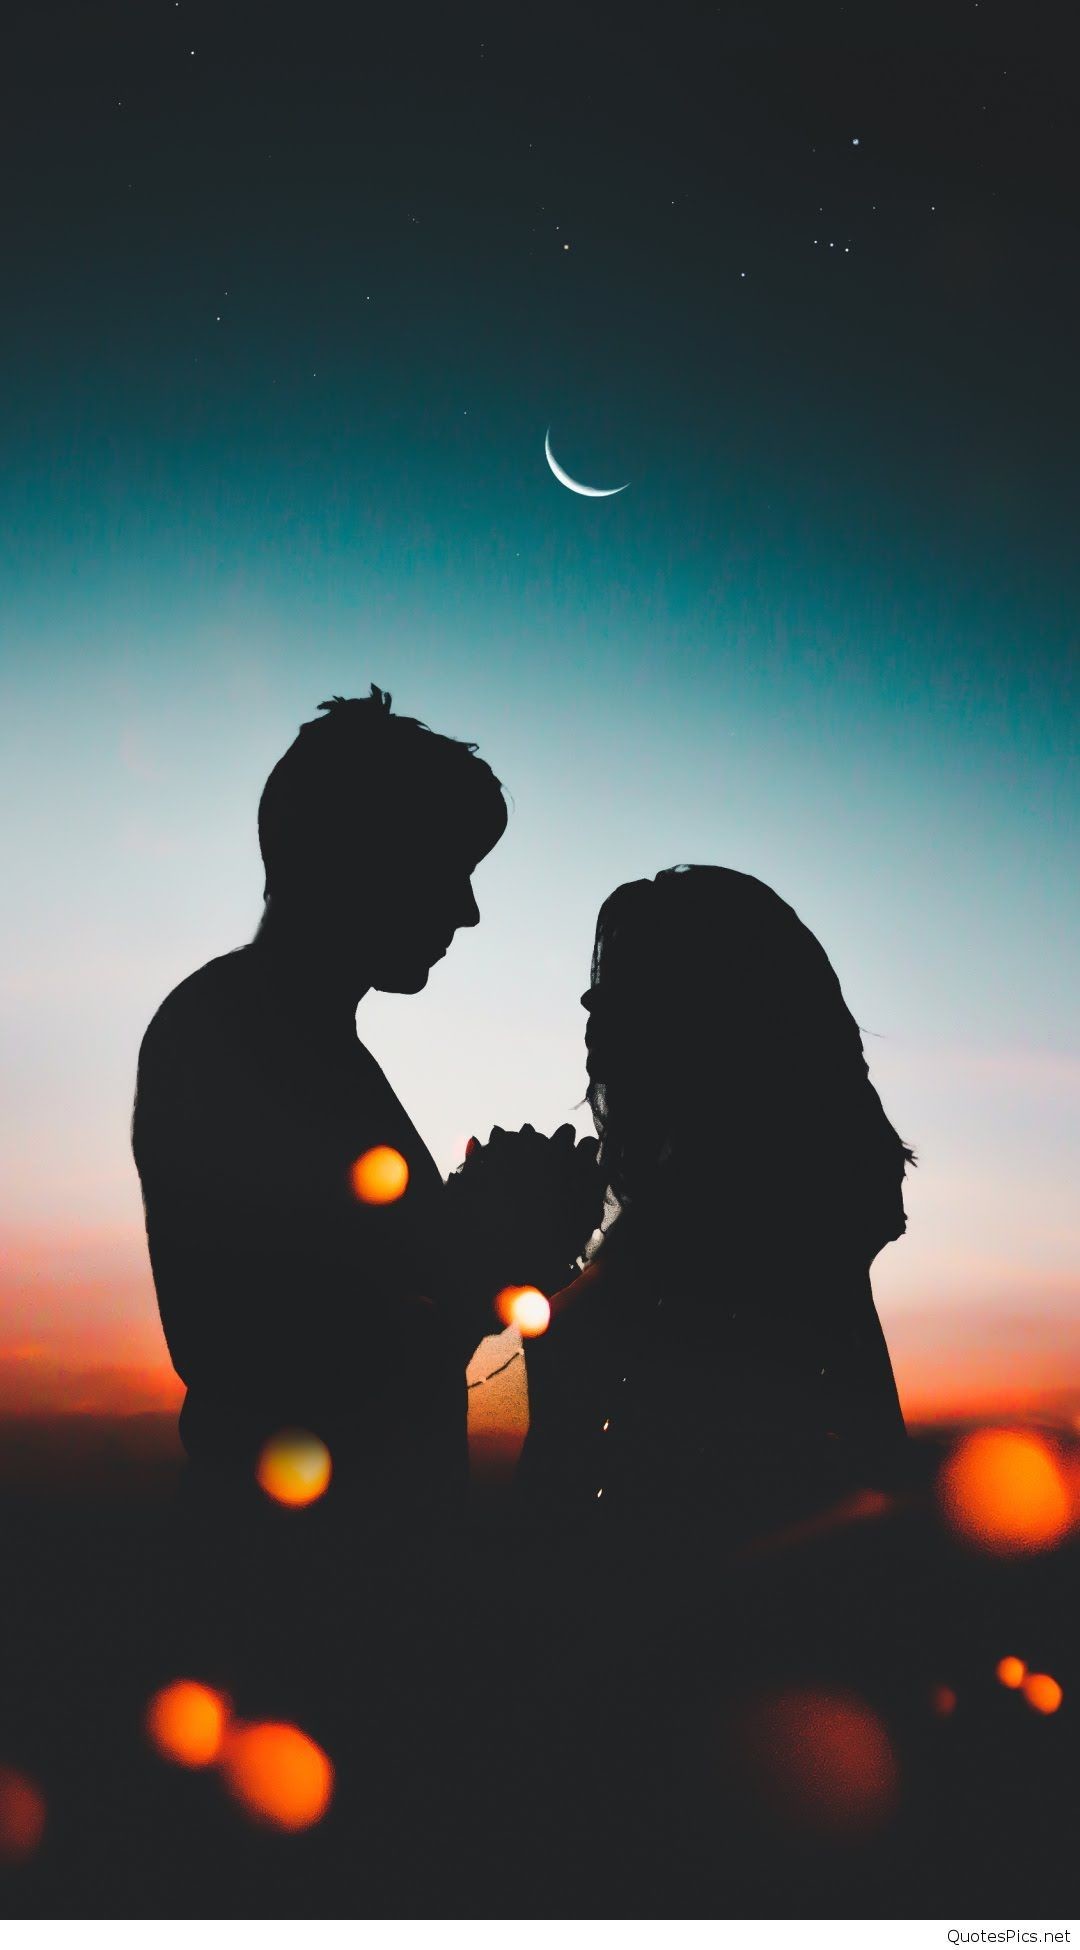 1080x1950 Download Cute Love Wallpapers For Mobile Phones HD